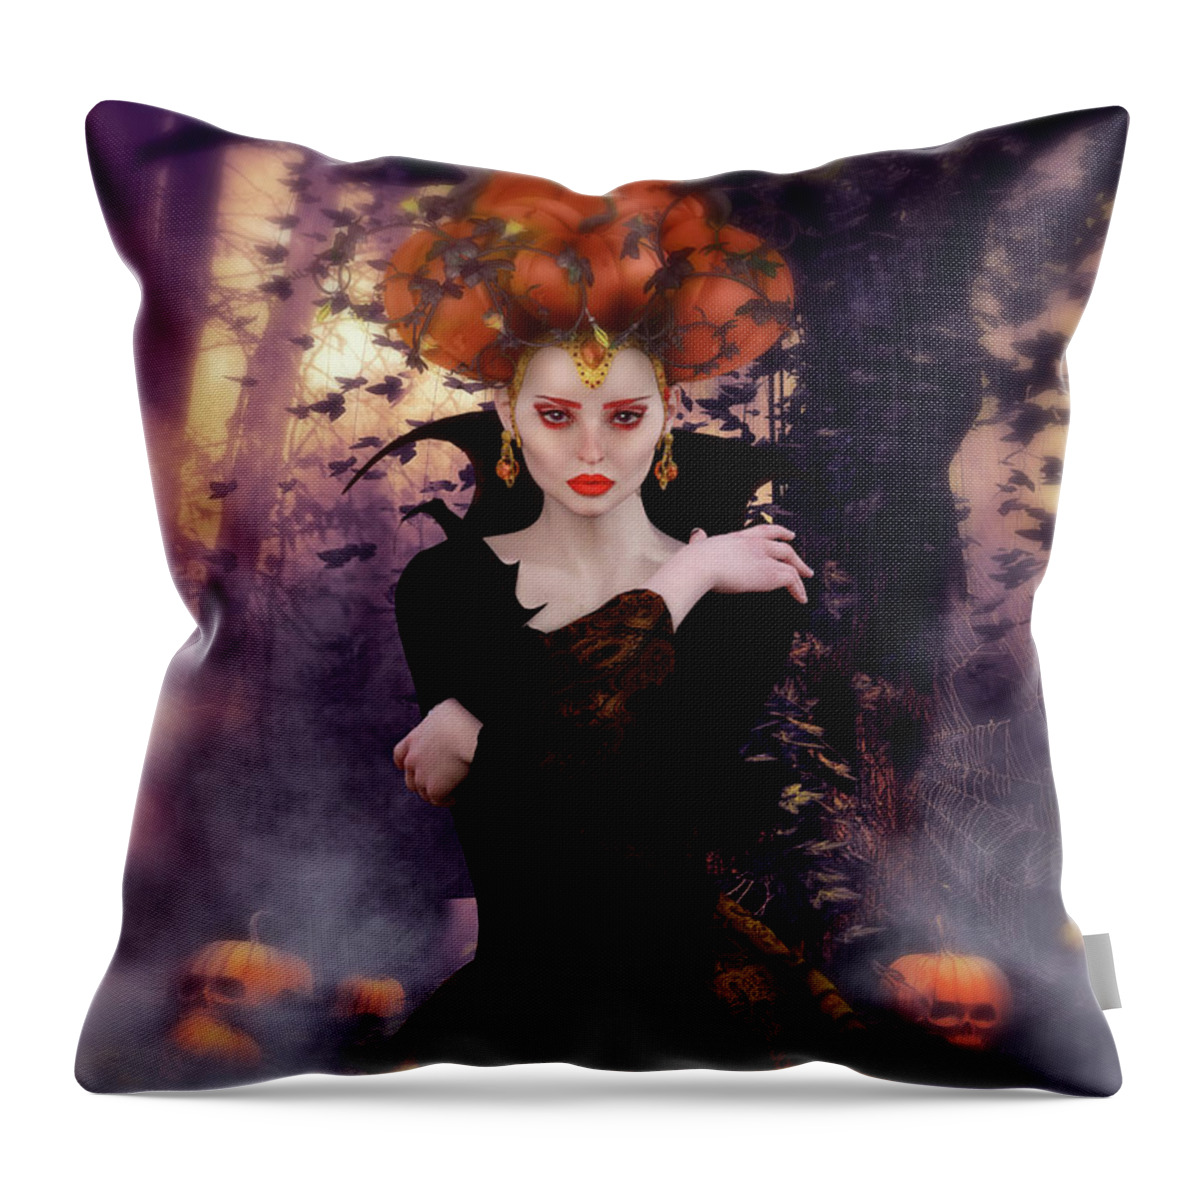 Pumpkin Witch Throw Pillow featuring the digital art Pumpkin Witch by Shanina Conway